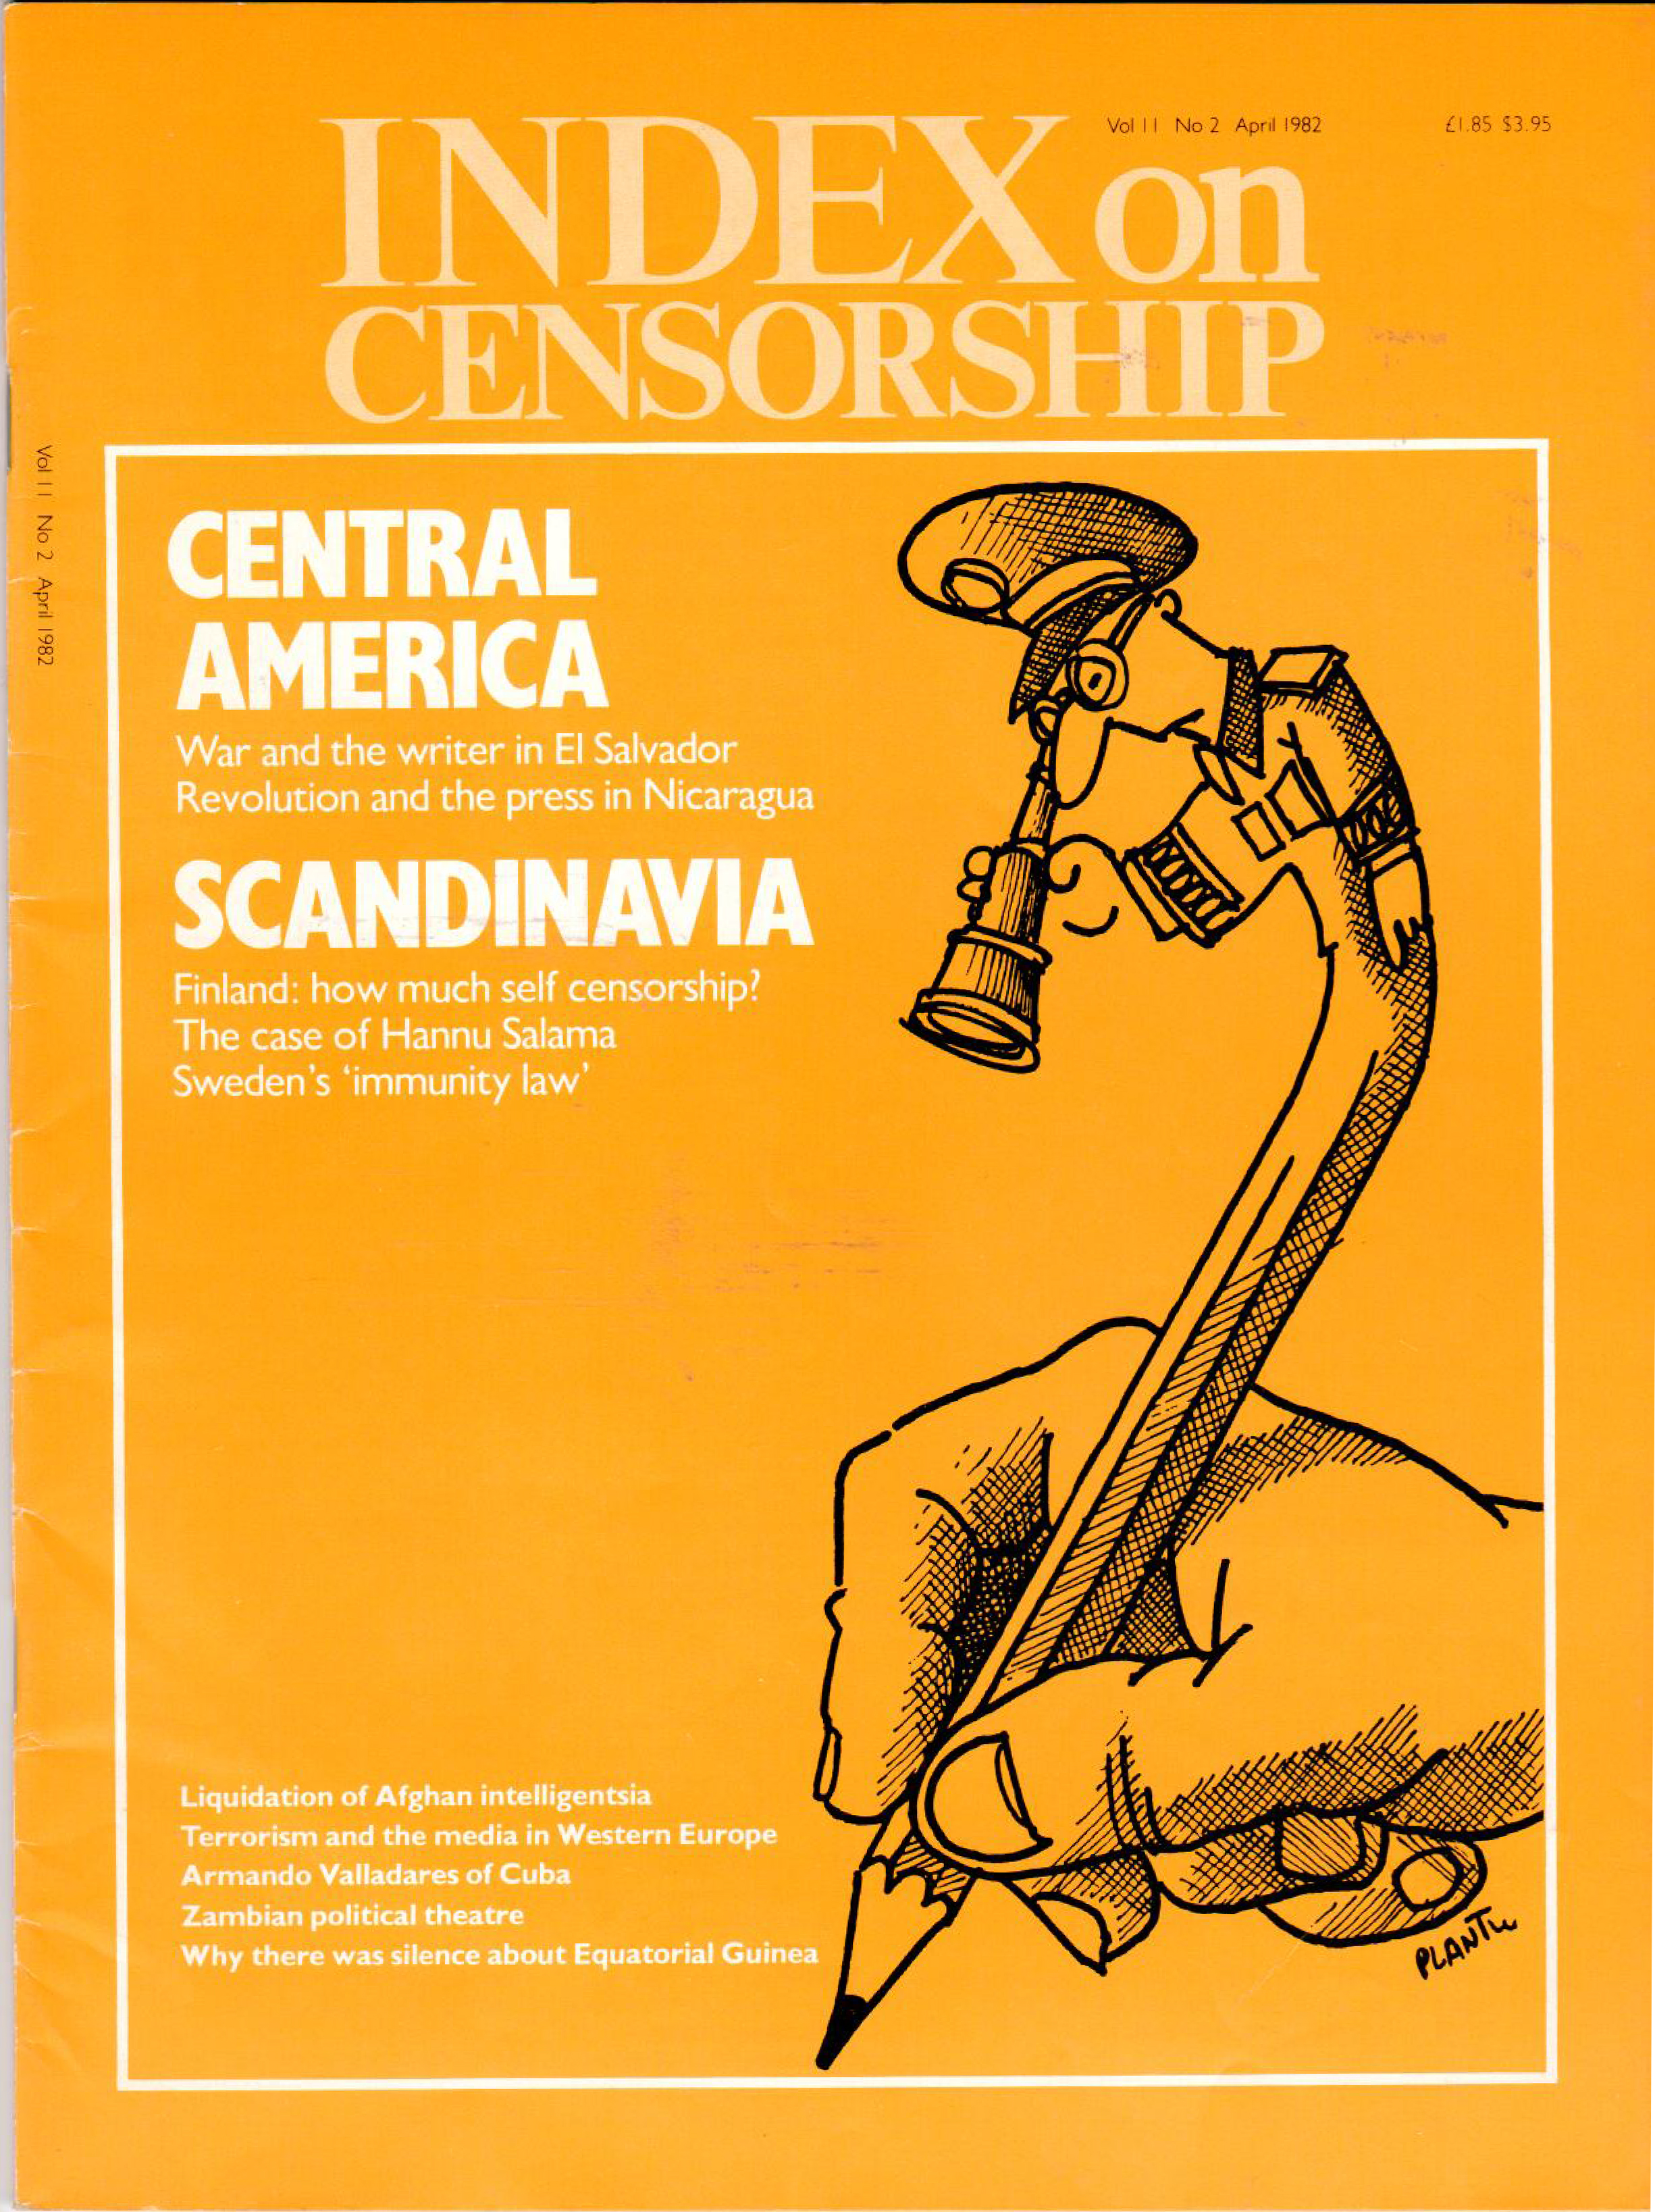 Central America. the April 1982 issue of Index on Censorship magazine